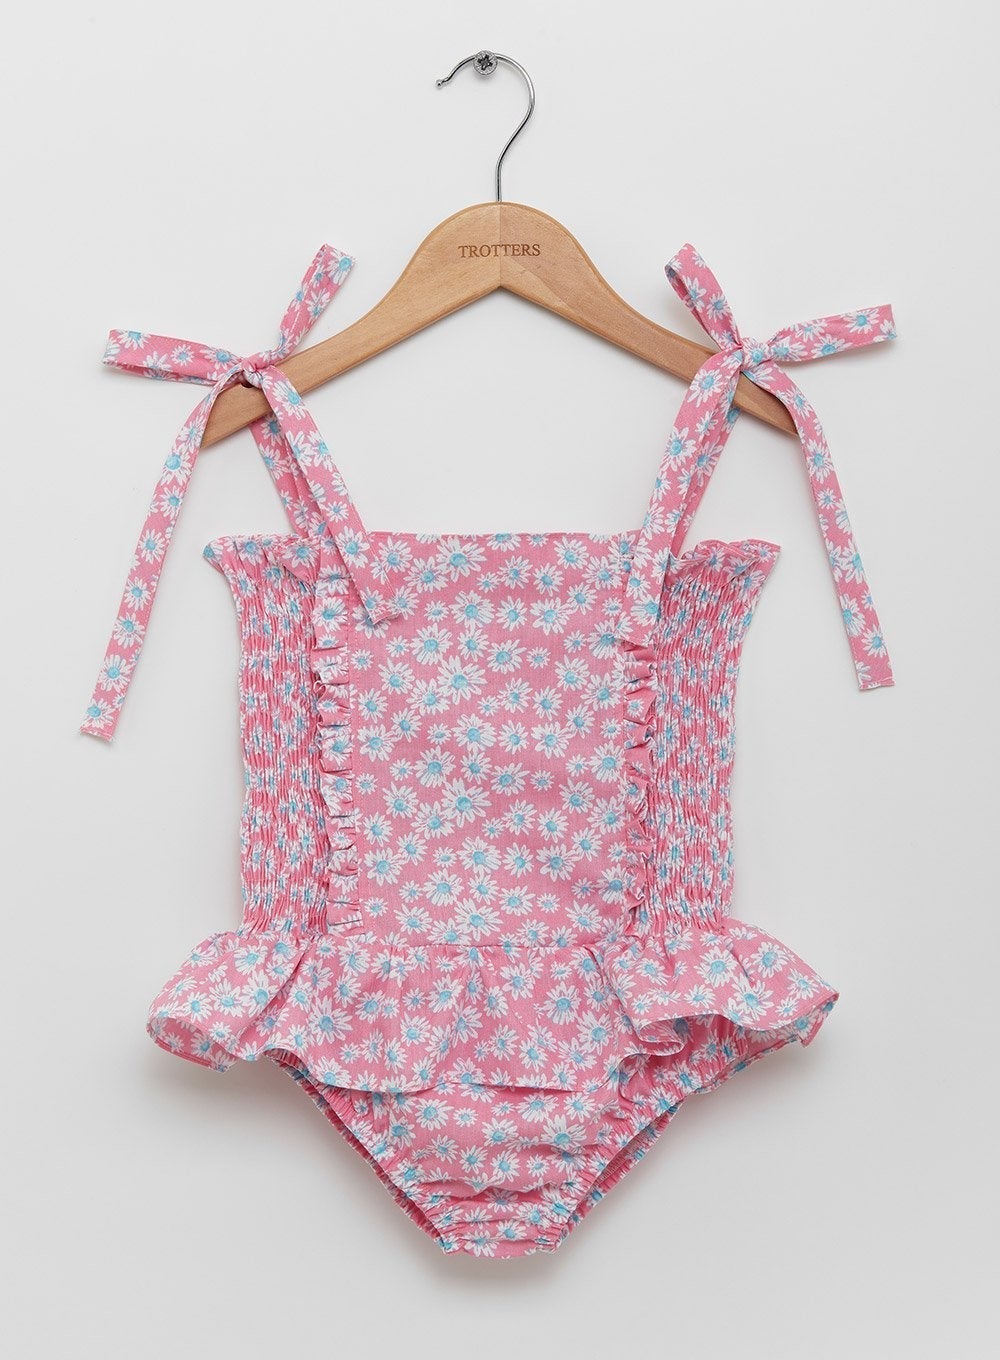 Trotters Swim Swimsuit Ruched Swimsuit in Pink Daisy